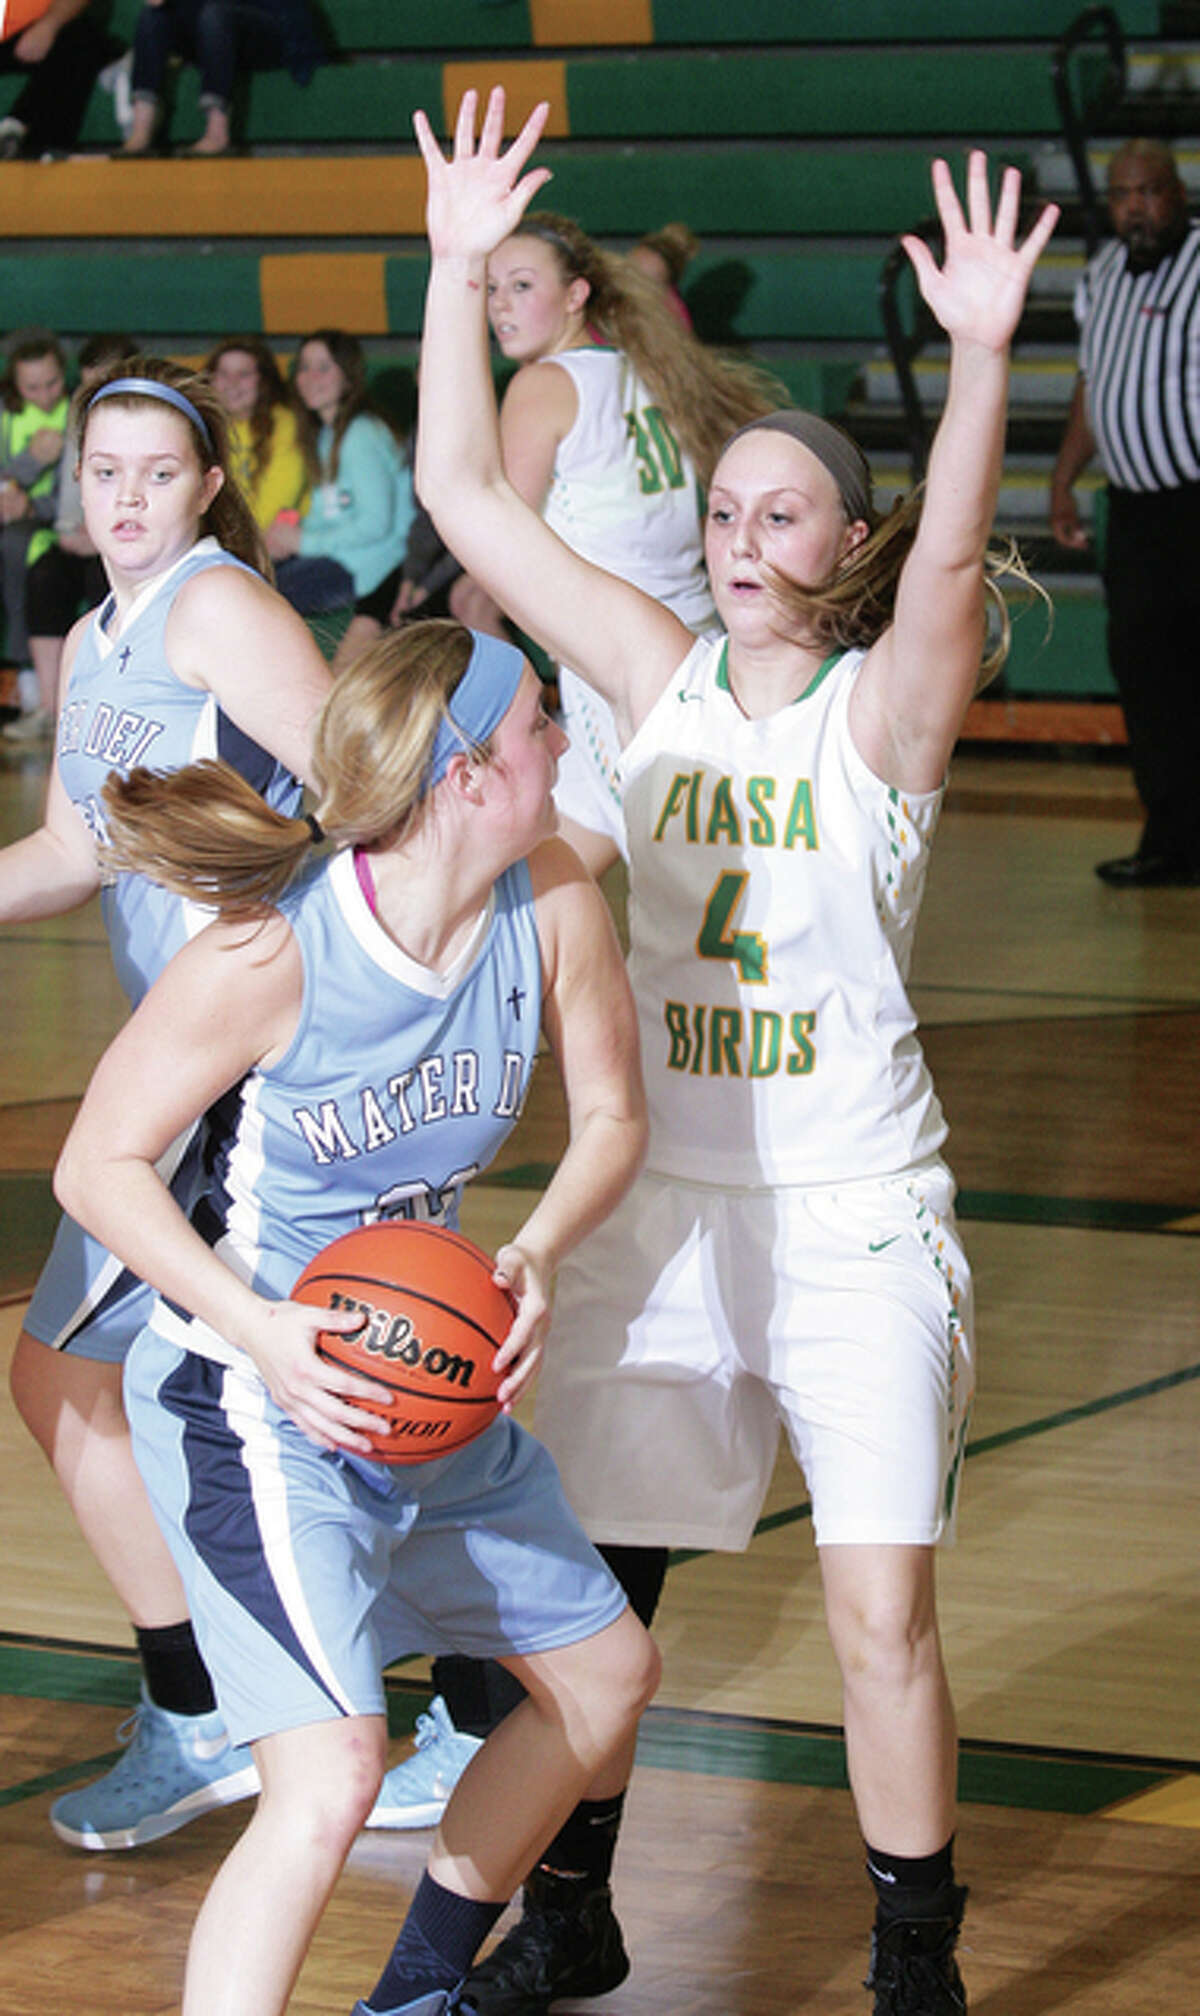 Southwestern’s Karlie Greene (right) defends while Breese Mater Dei’s Myah Beckmann looks for help during a Piasa Birds win Dec. 12 in Piasa. The Birds take an 11-3 record and seven-game winning streak into this week’s Jersey Tournament.